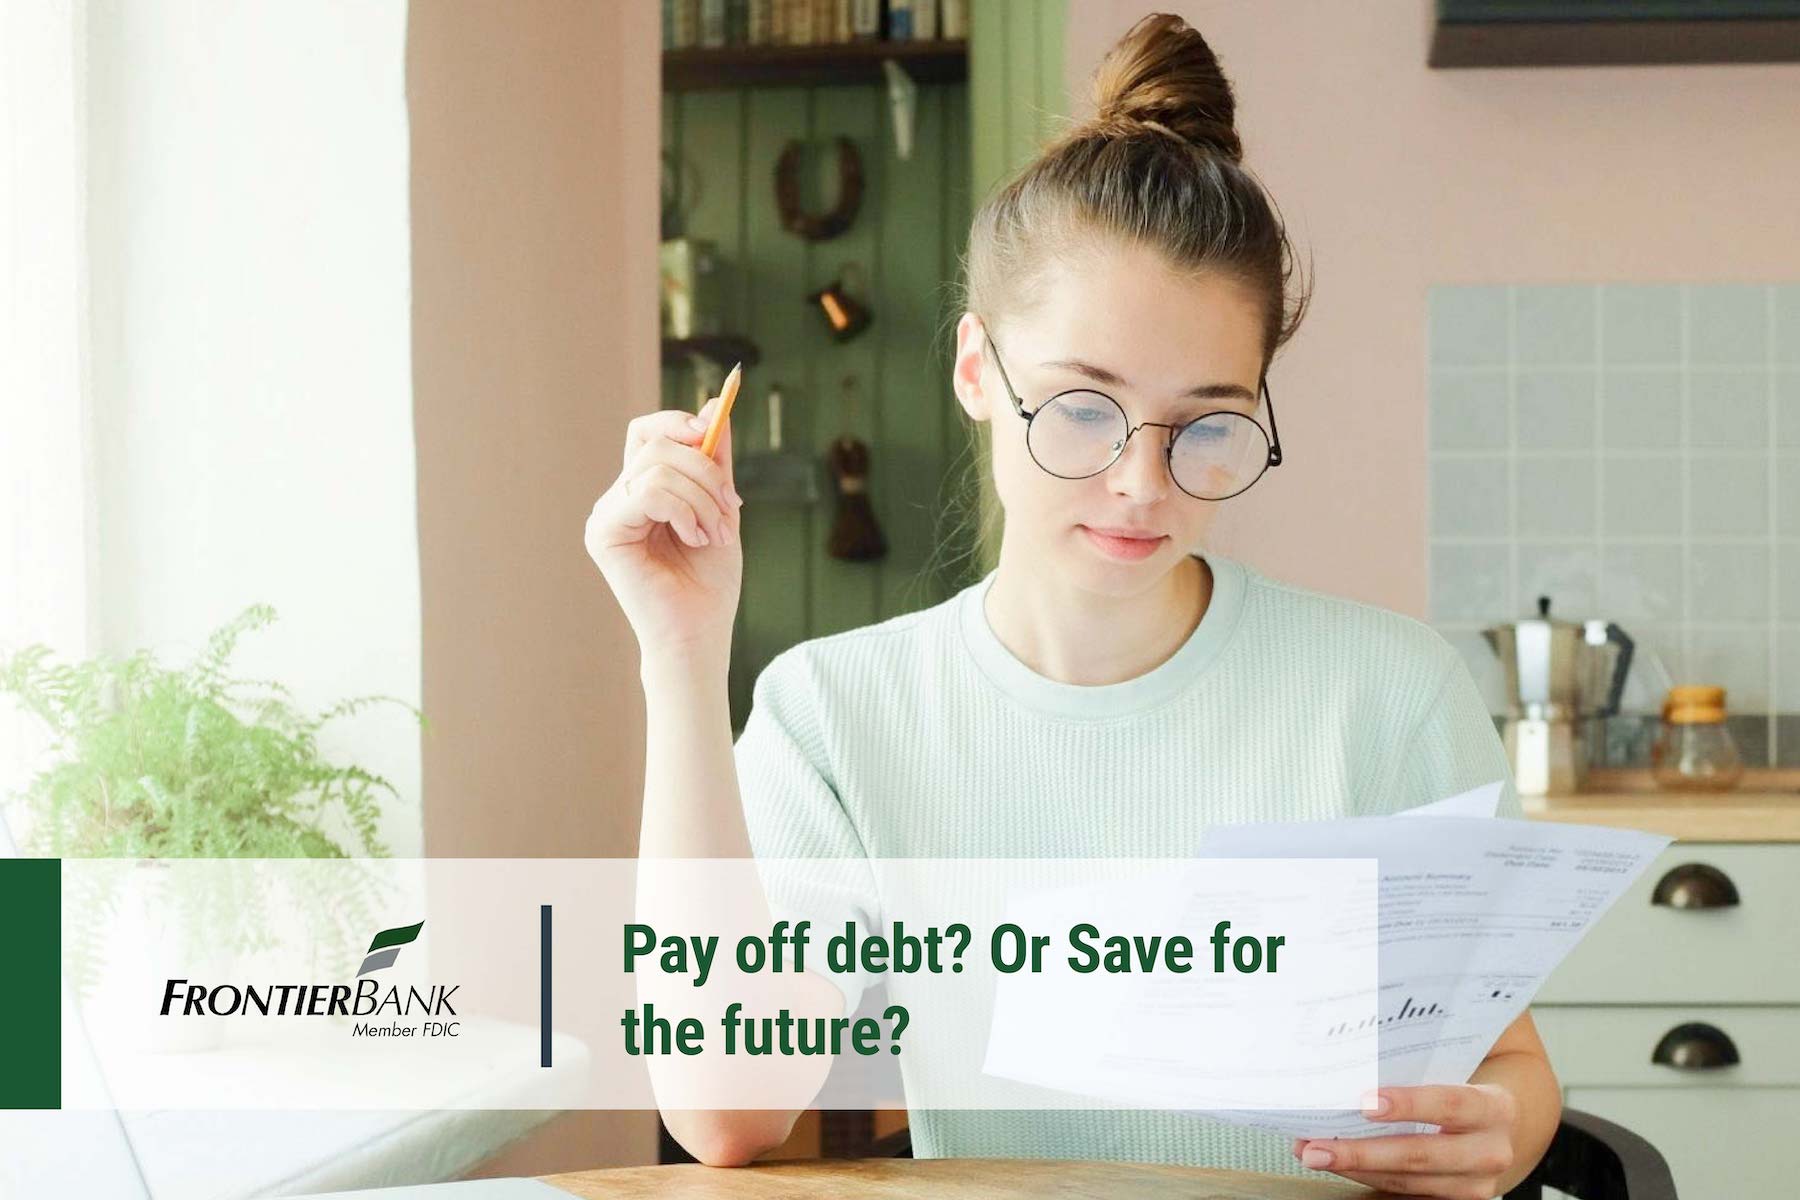 Pay off Debt or Save for the future